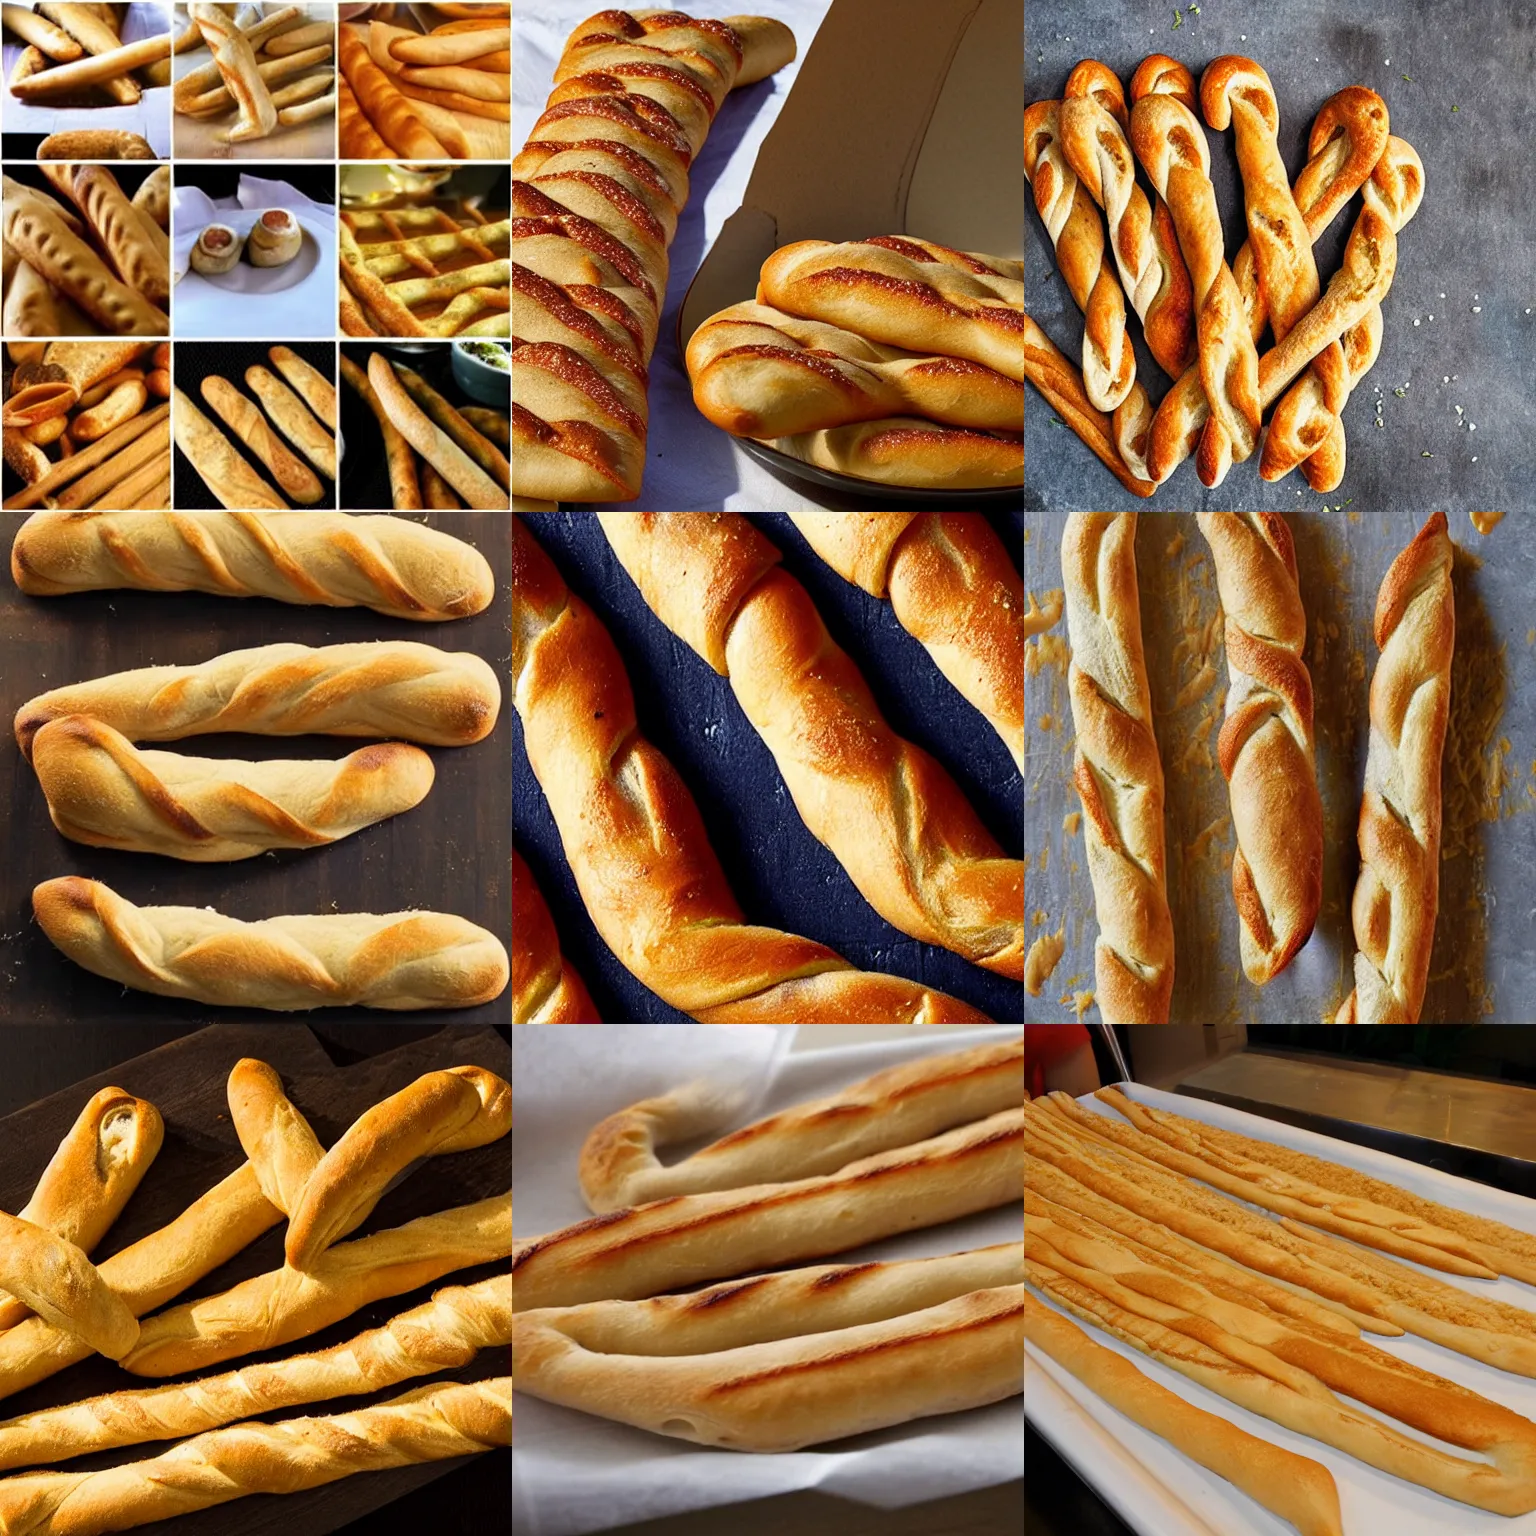 Star Wars but with baguettes instead of lightsabers 